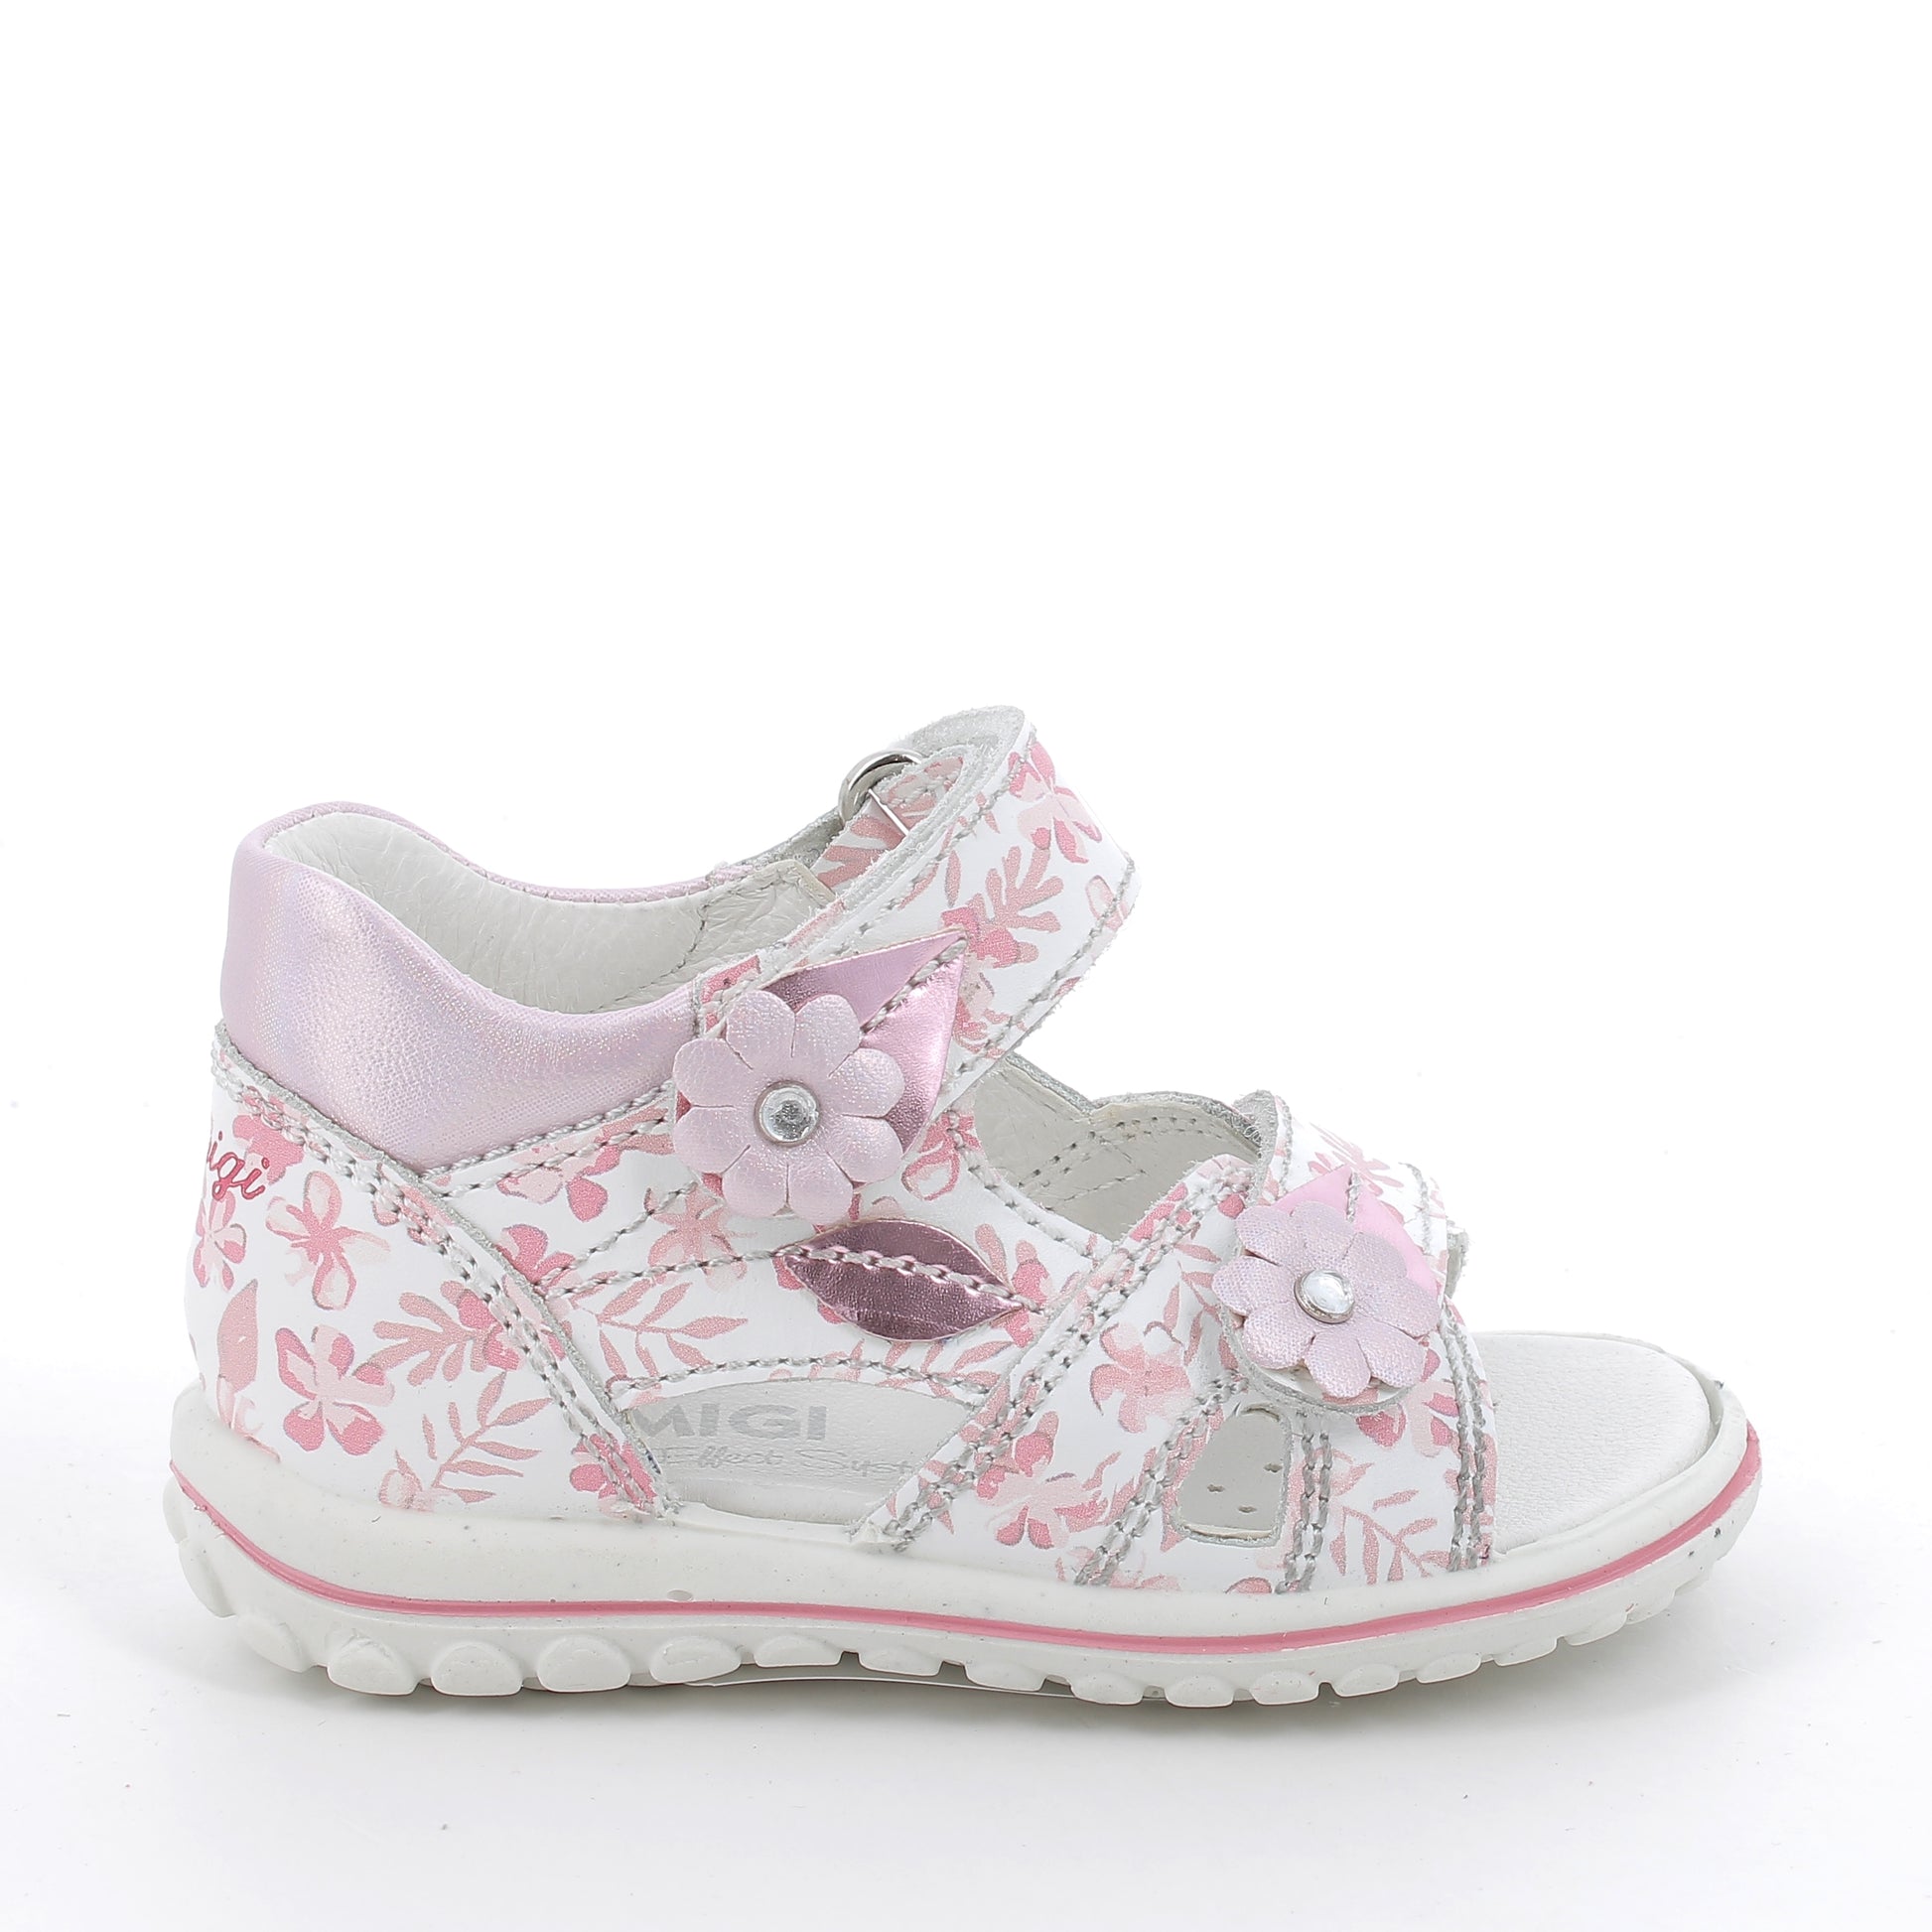 A girls open toe sandal by Primigi, style 3860900 Baby Sweet, in white and pink floral  leather with velcro fastening. Right side view.